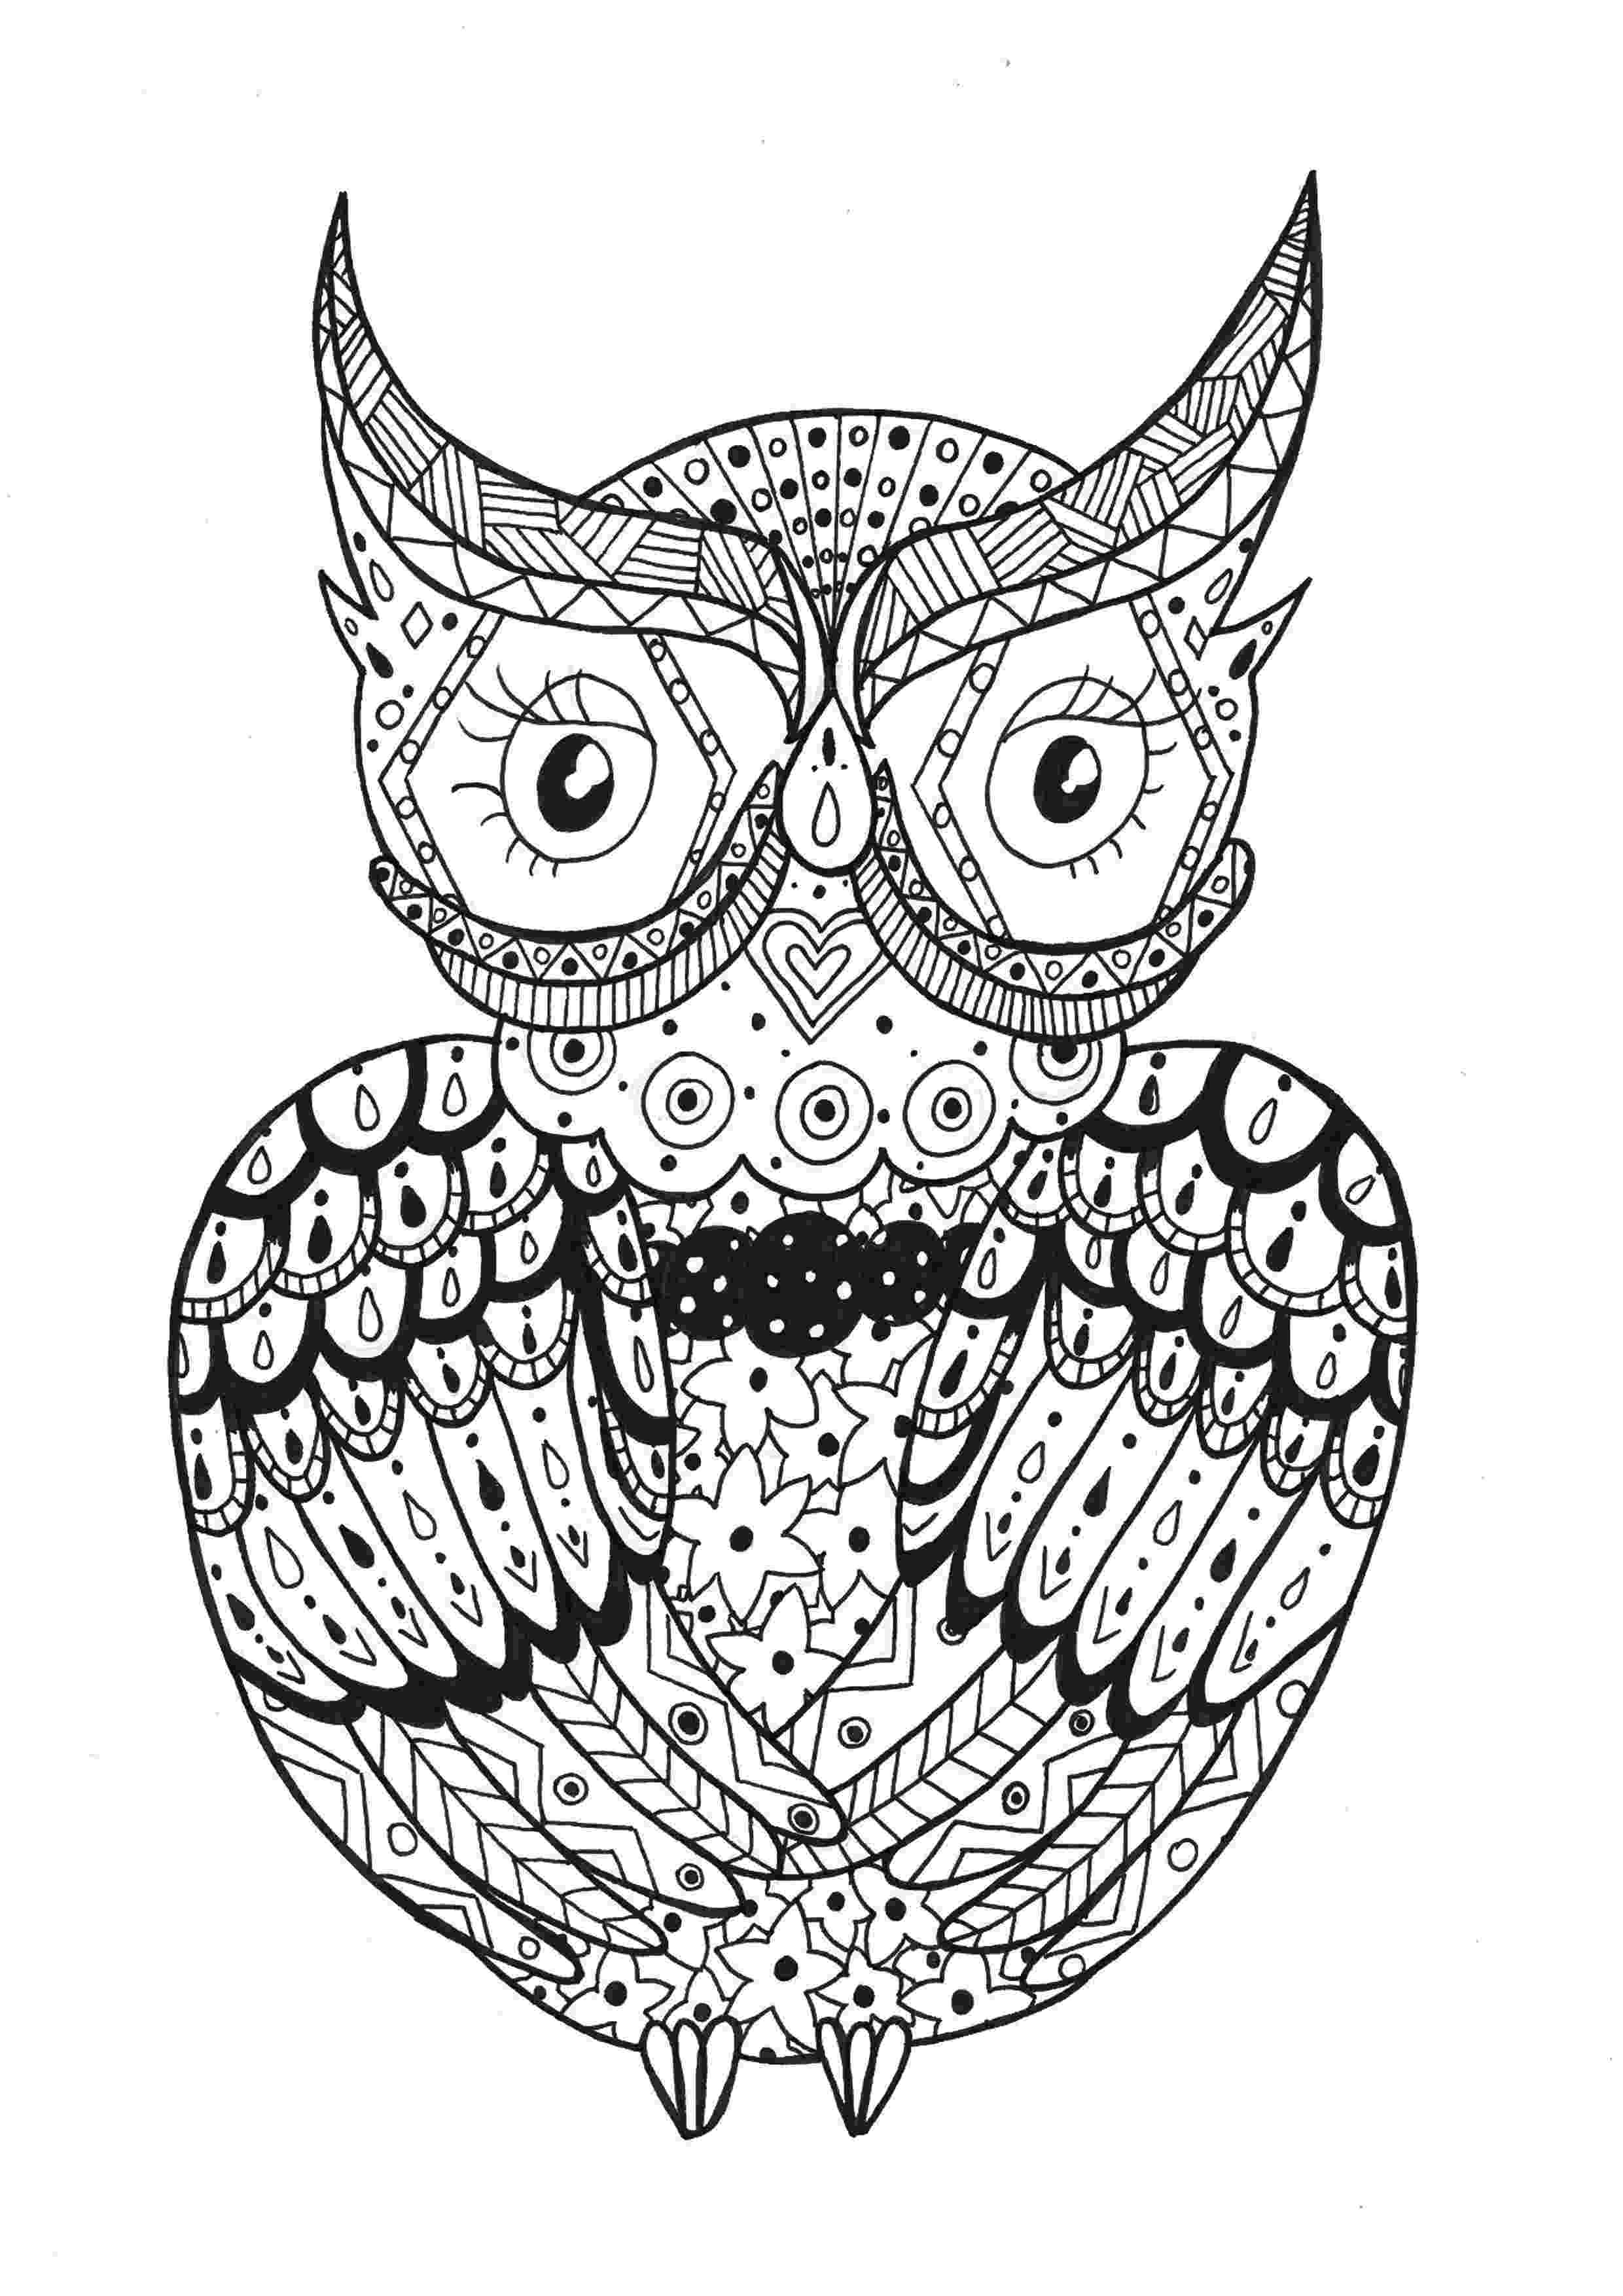 color zentangle zentangle to print zentangle kids coloring pages zentangle color 1 1